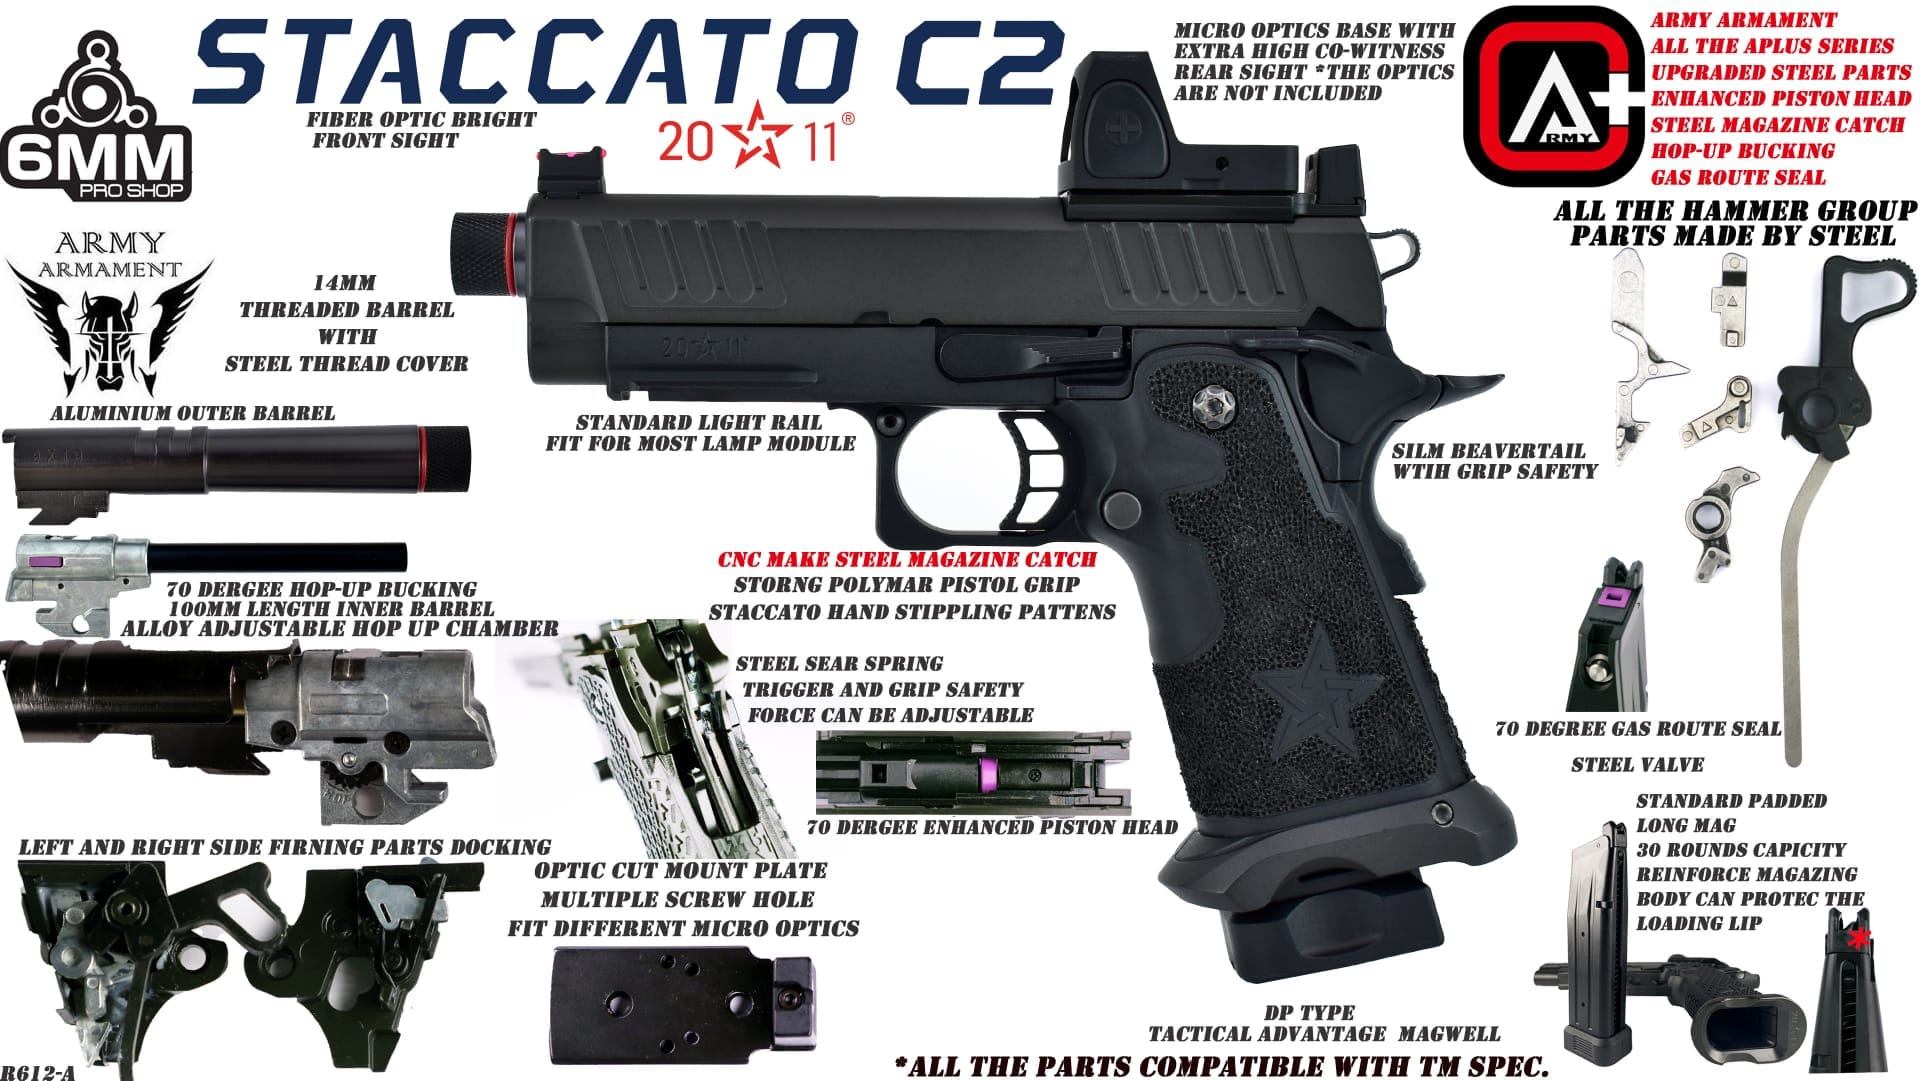 Army Armament Staccato C2